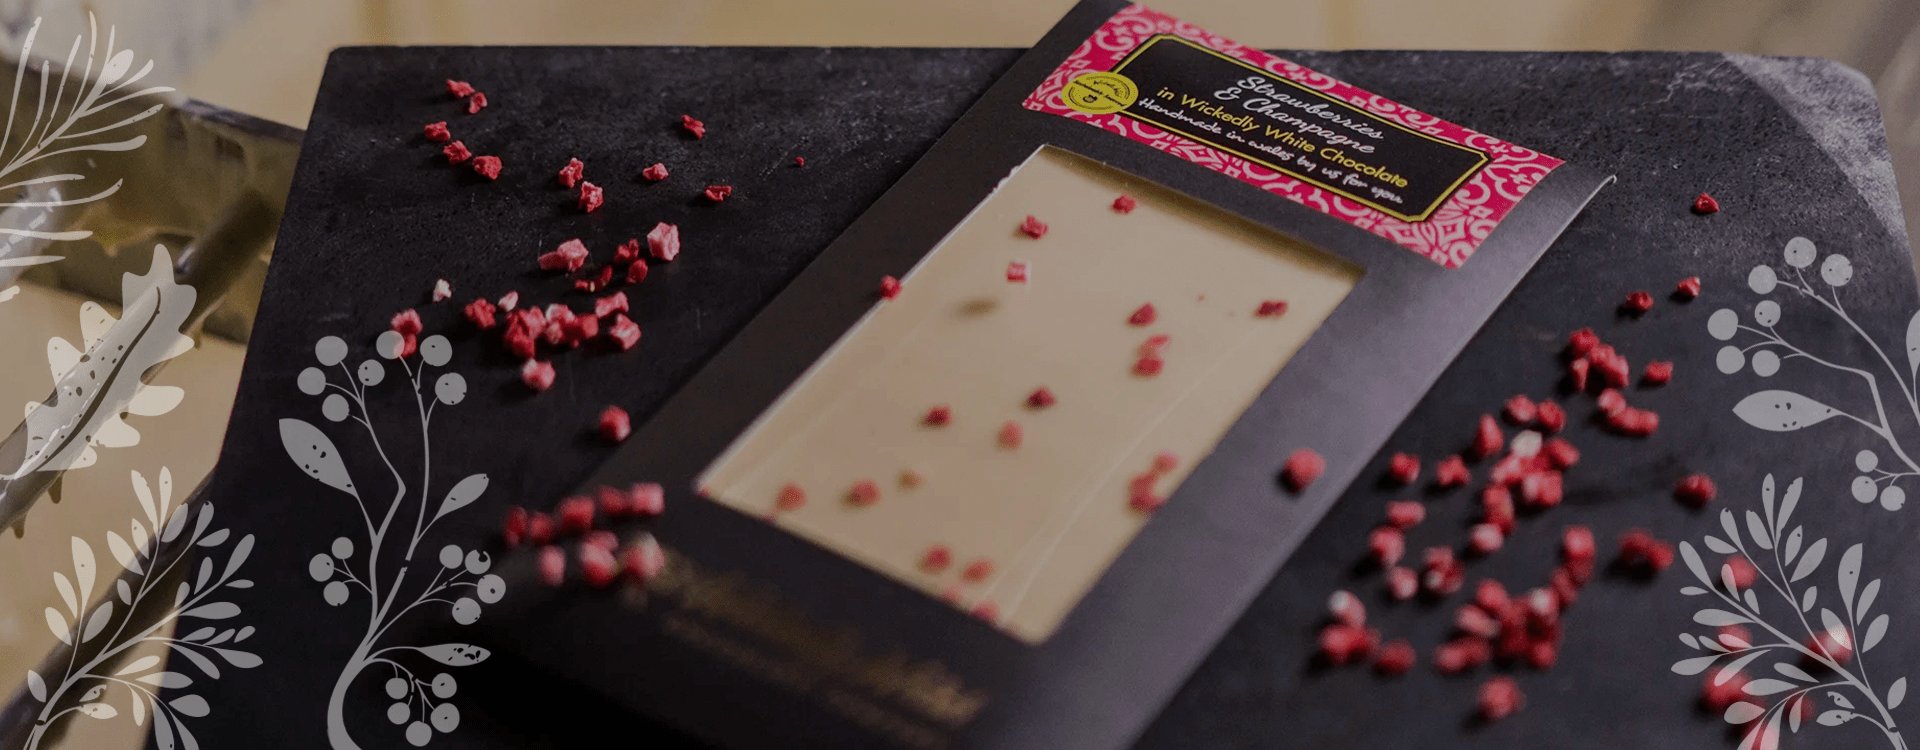 Bar-fection ... Perfection in Confection - Wickedly Welsh Chocolate Company Ltd